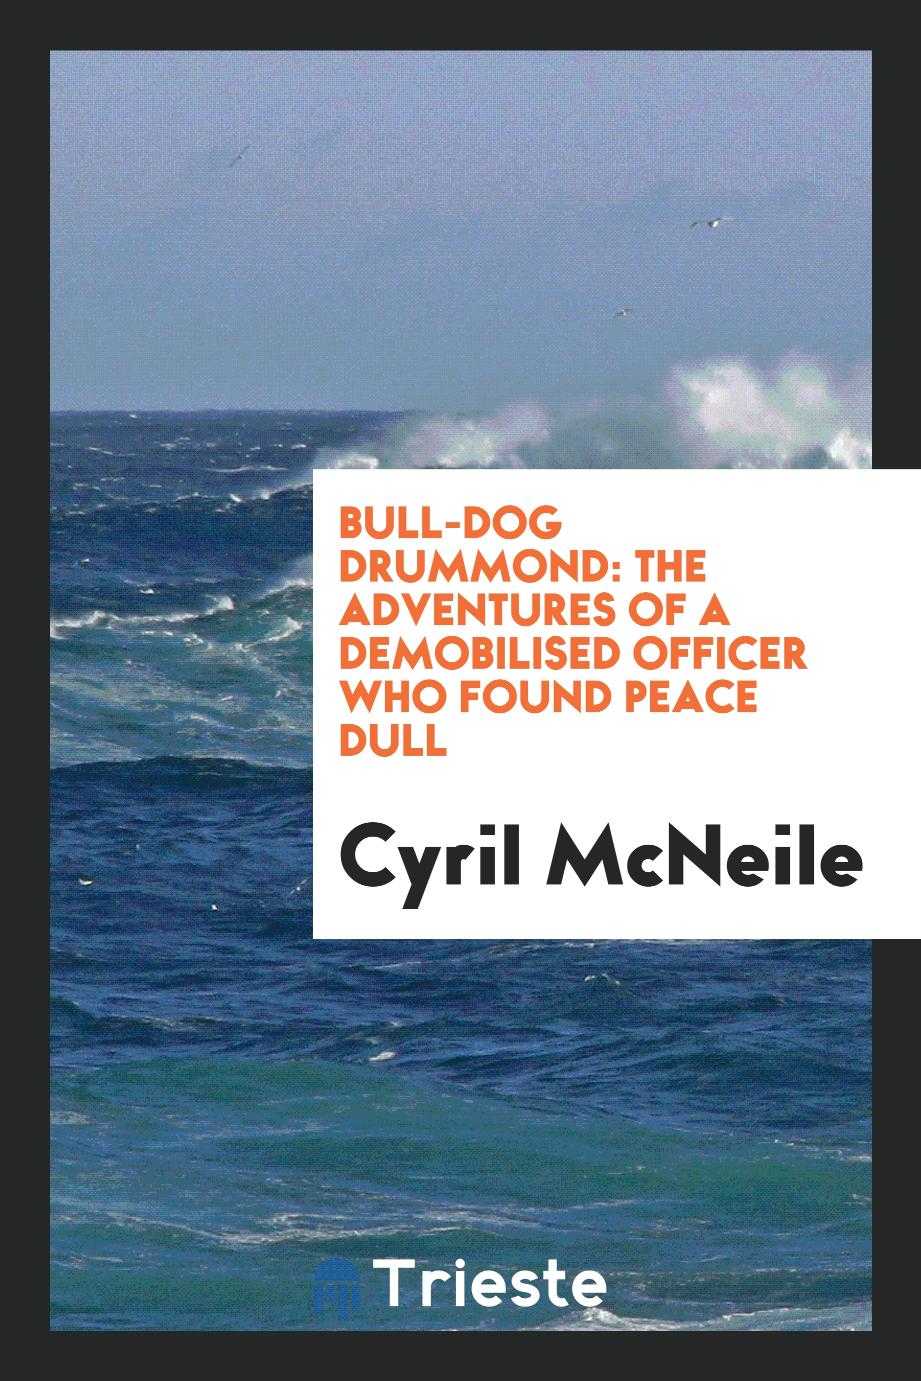 Bull-Dog Drummond: The Adventures of a Demobilised Officer Who Found Peace Dull